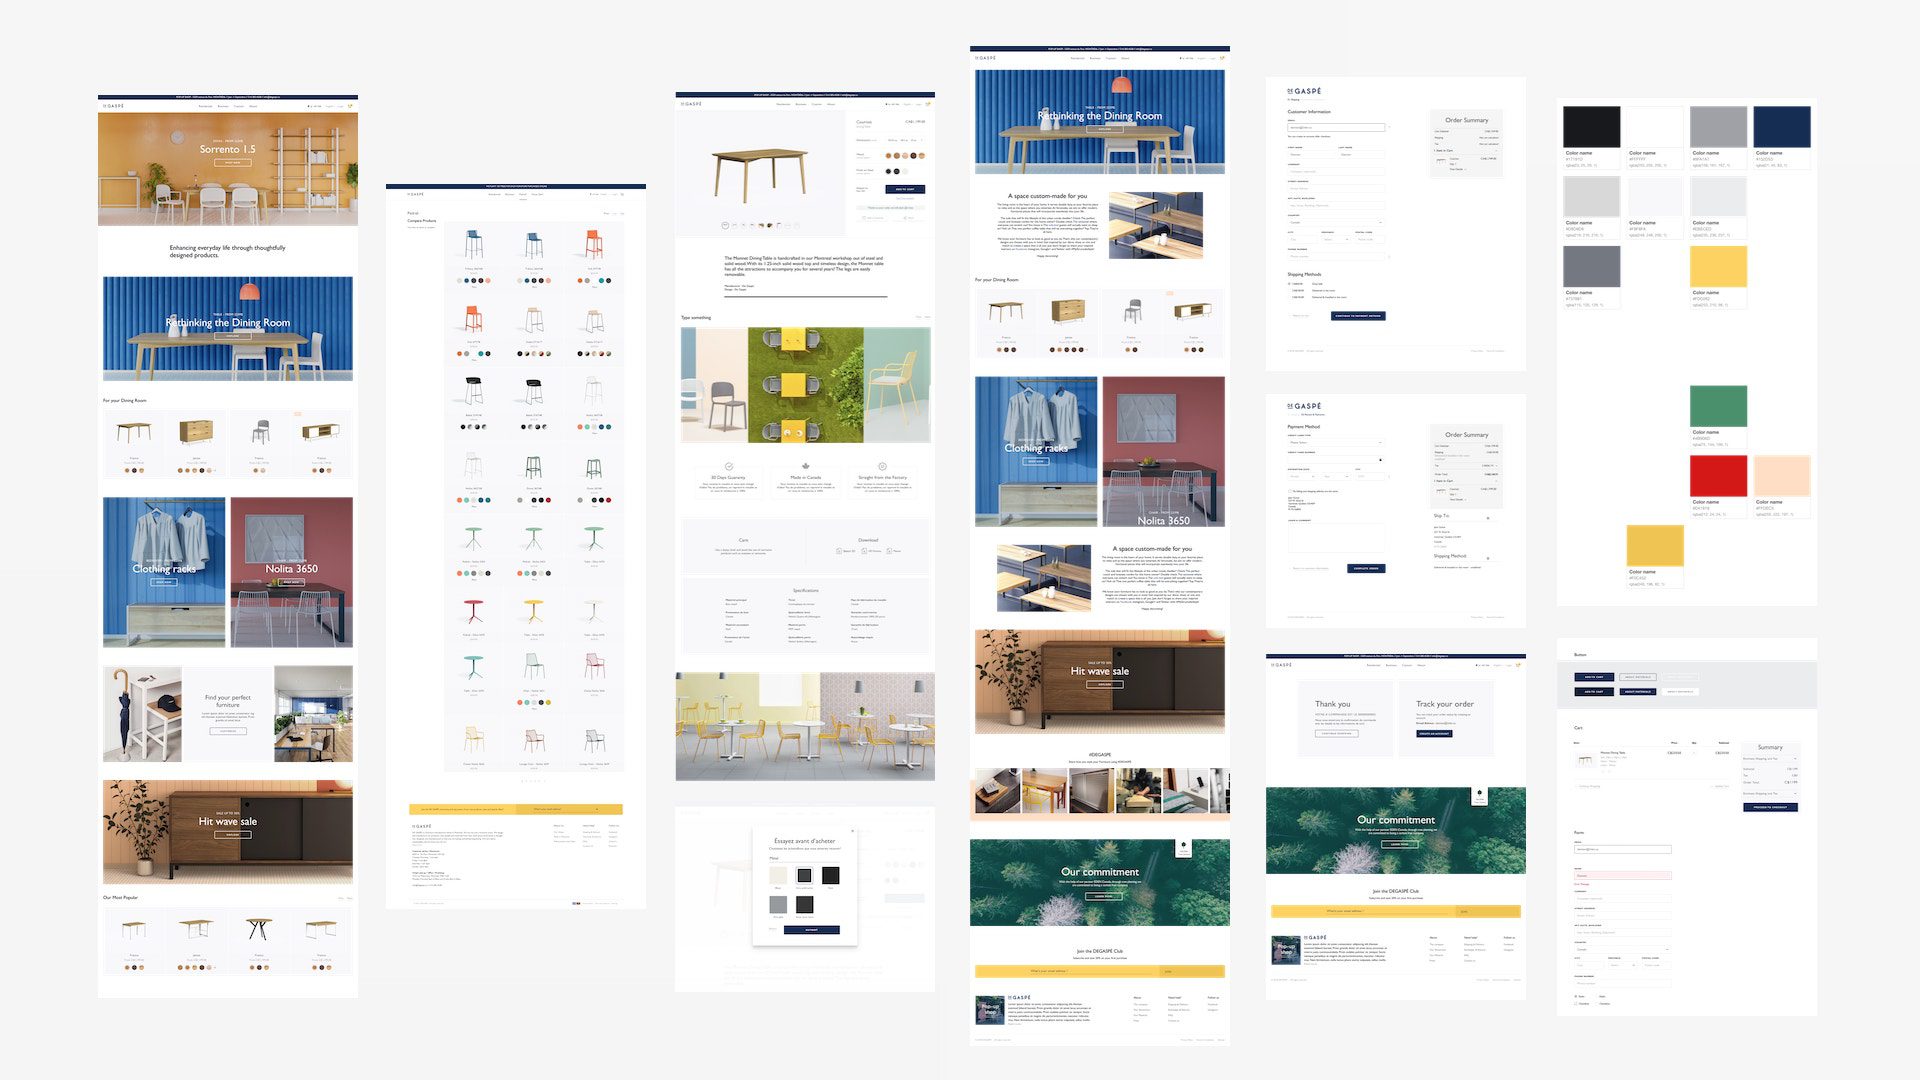 Few pages screenshots developed by our magento agency.